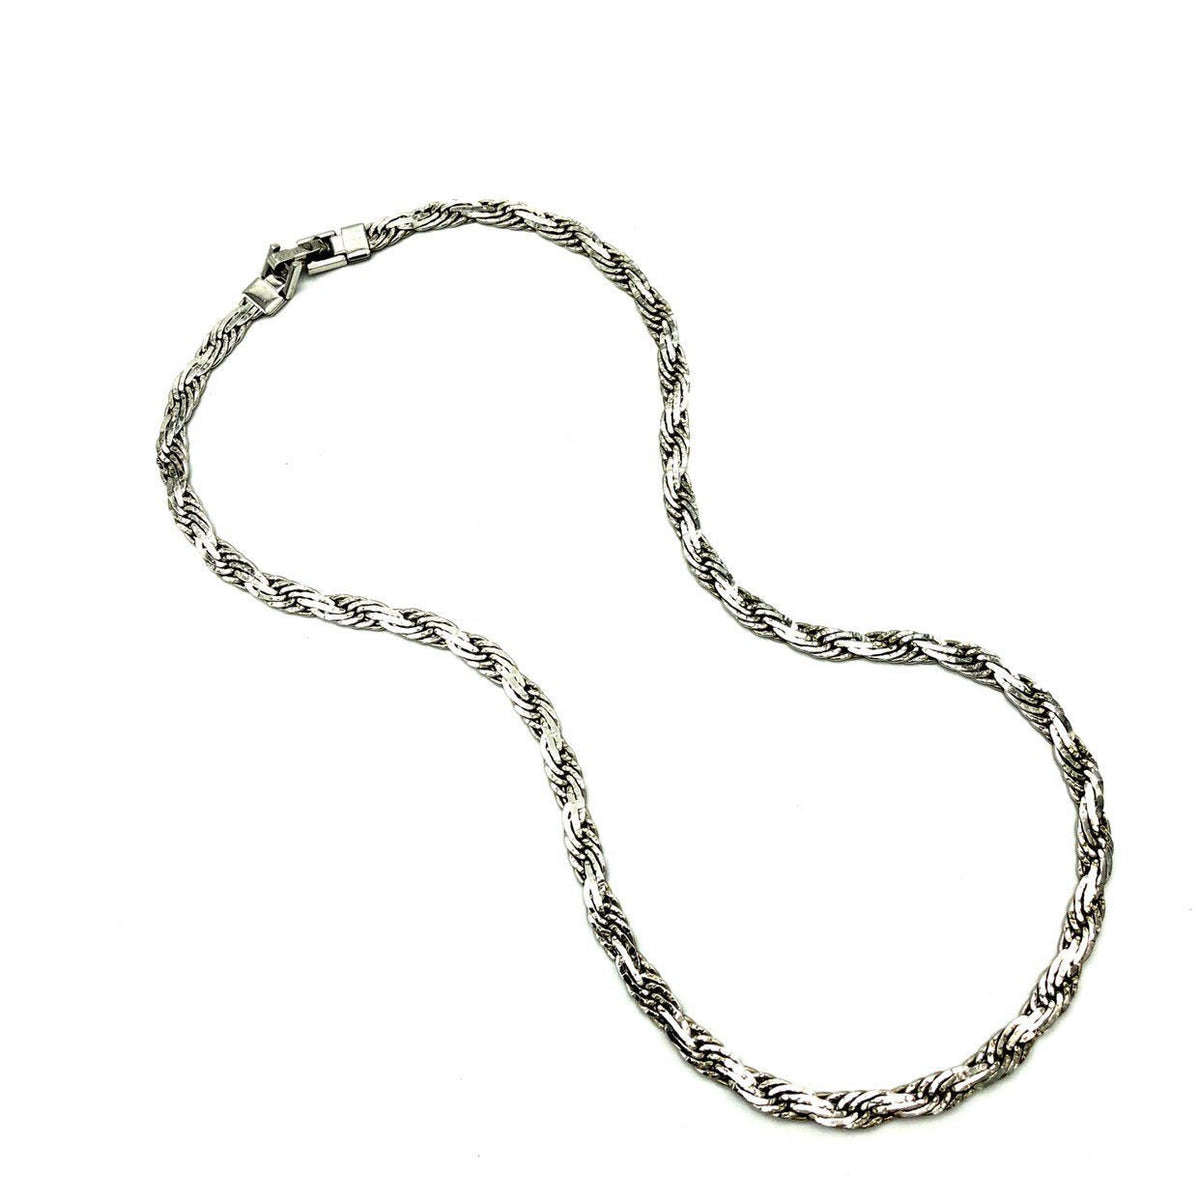 Dainty Vintage Silver Crown Trifari Chain Layering Necklace - 24 Wishes Vintage Jewelry